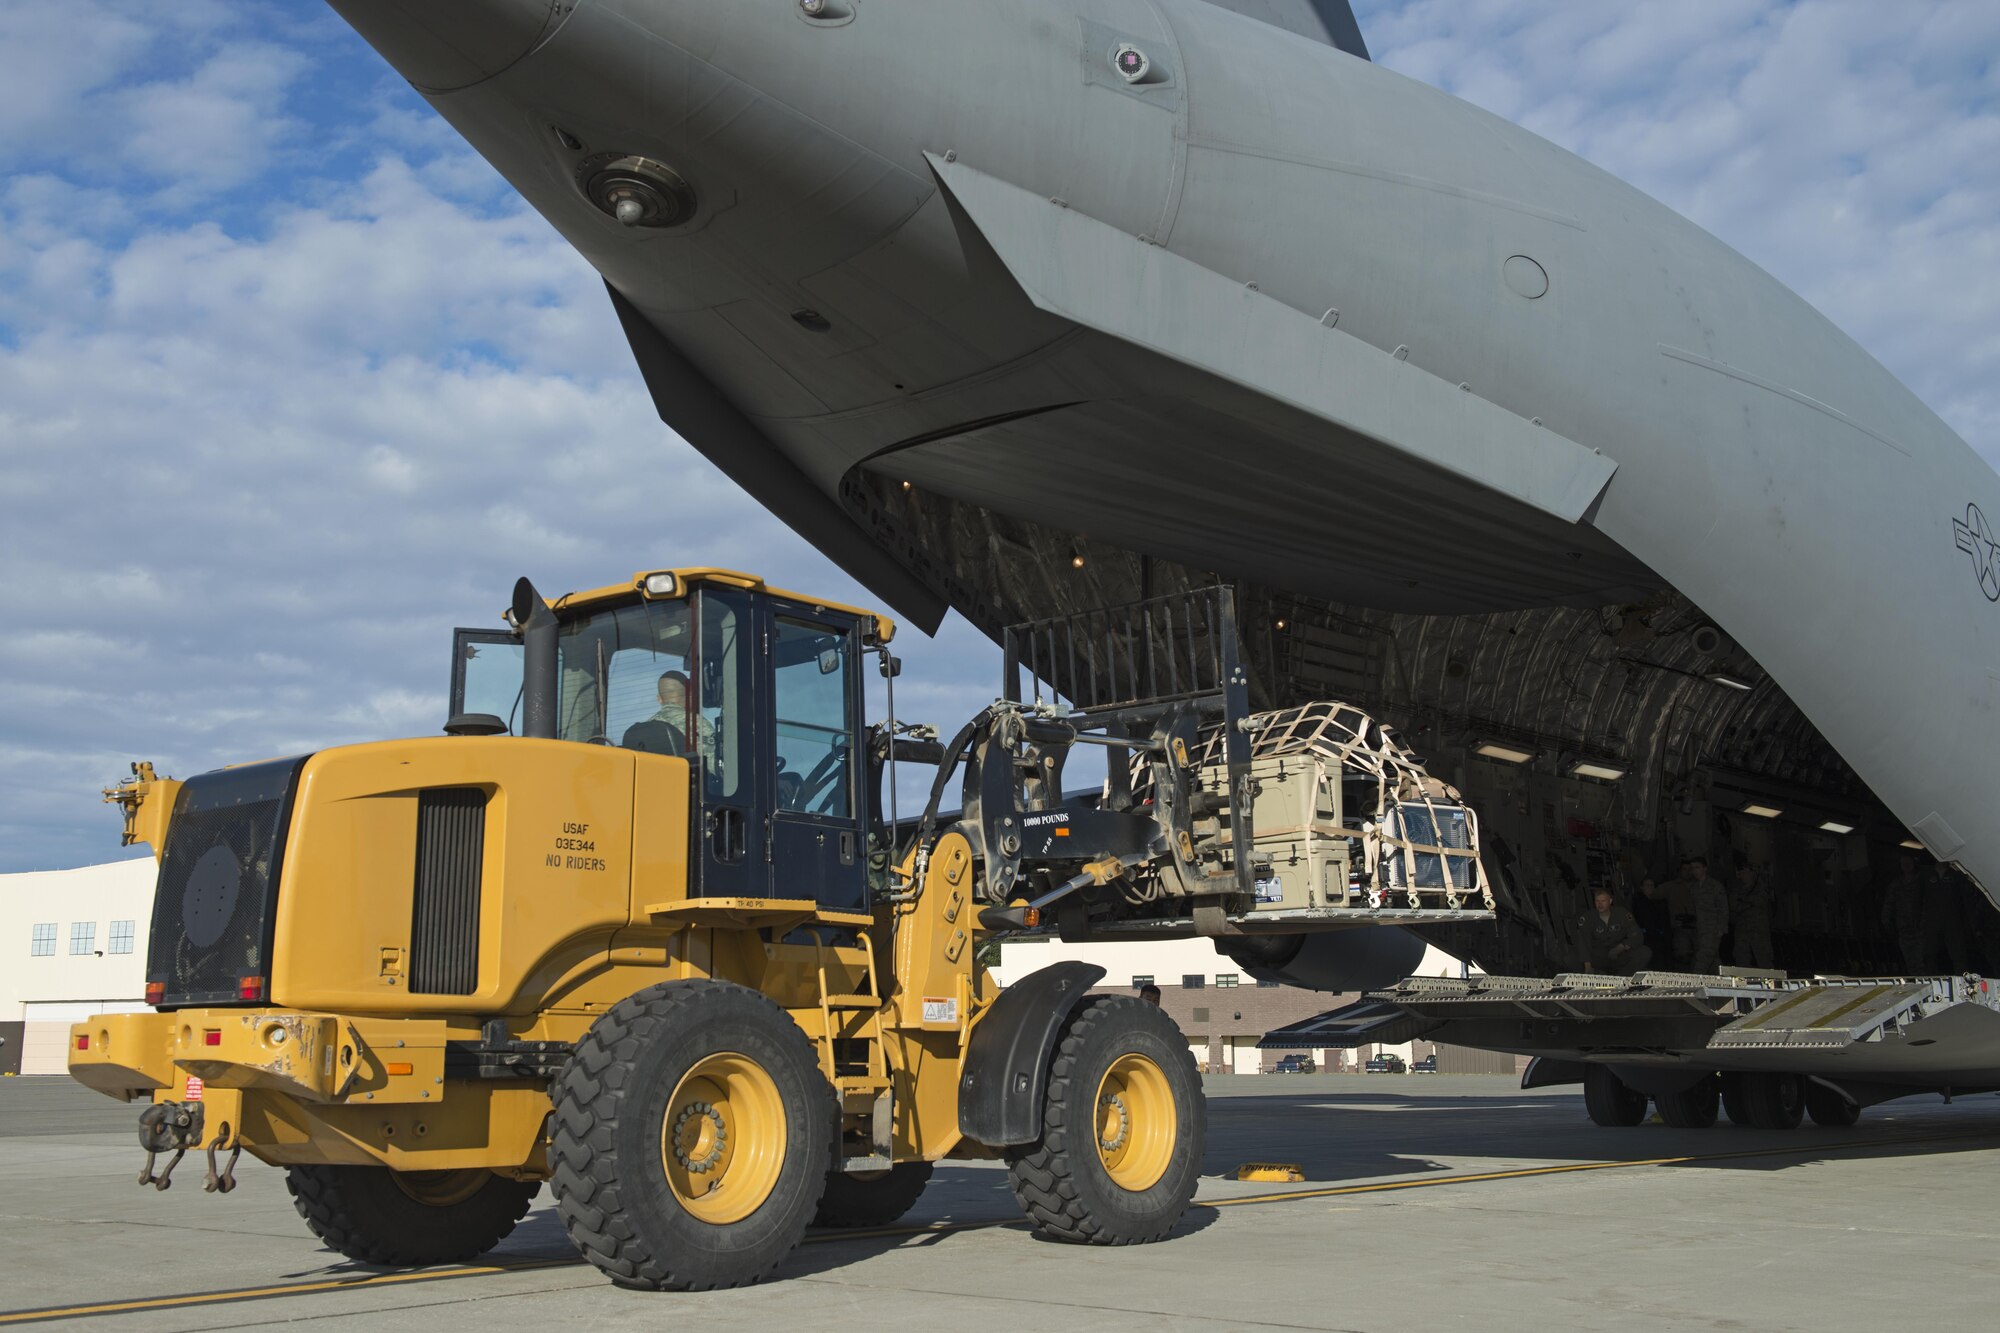 Airmen of the Alaska Air National Guard’s 176th Wing load and secure cargo onto a Joint Base Elmendorf-Richardson C-17 Globemaster III at JBER, Alaska, Aug. 28, 2017. The Airmen will travel to Houston, Texas as part of a humanitarian mission in response to Hurricane Harvey.